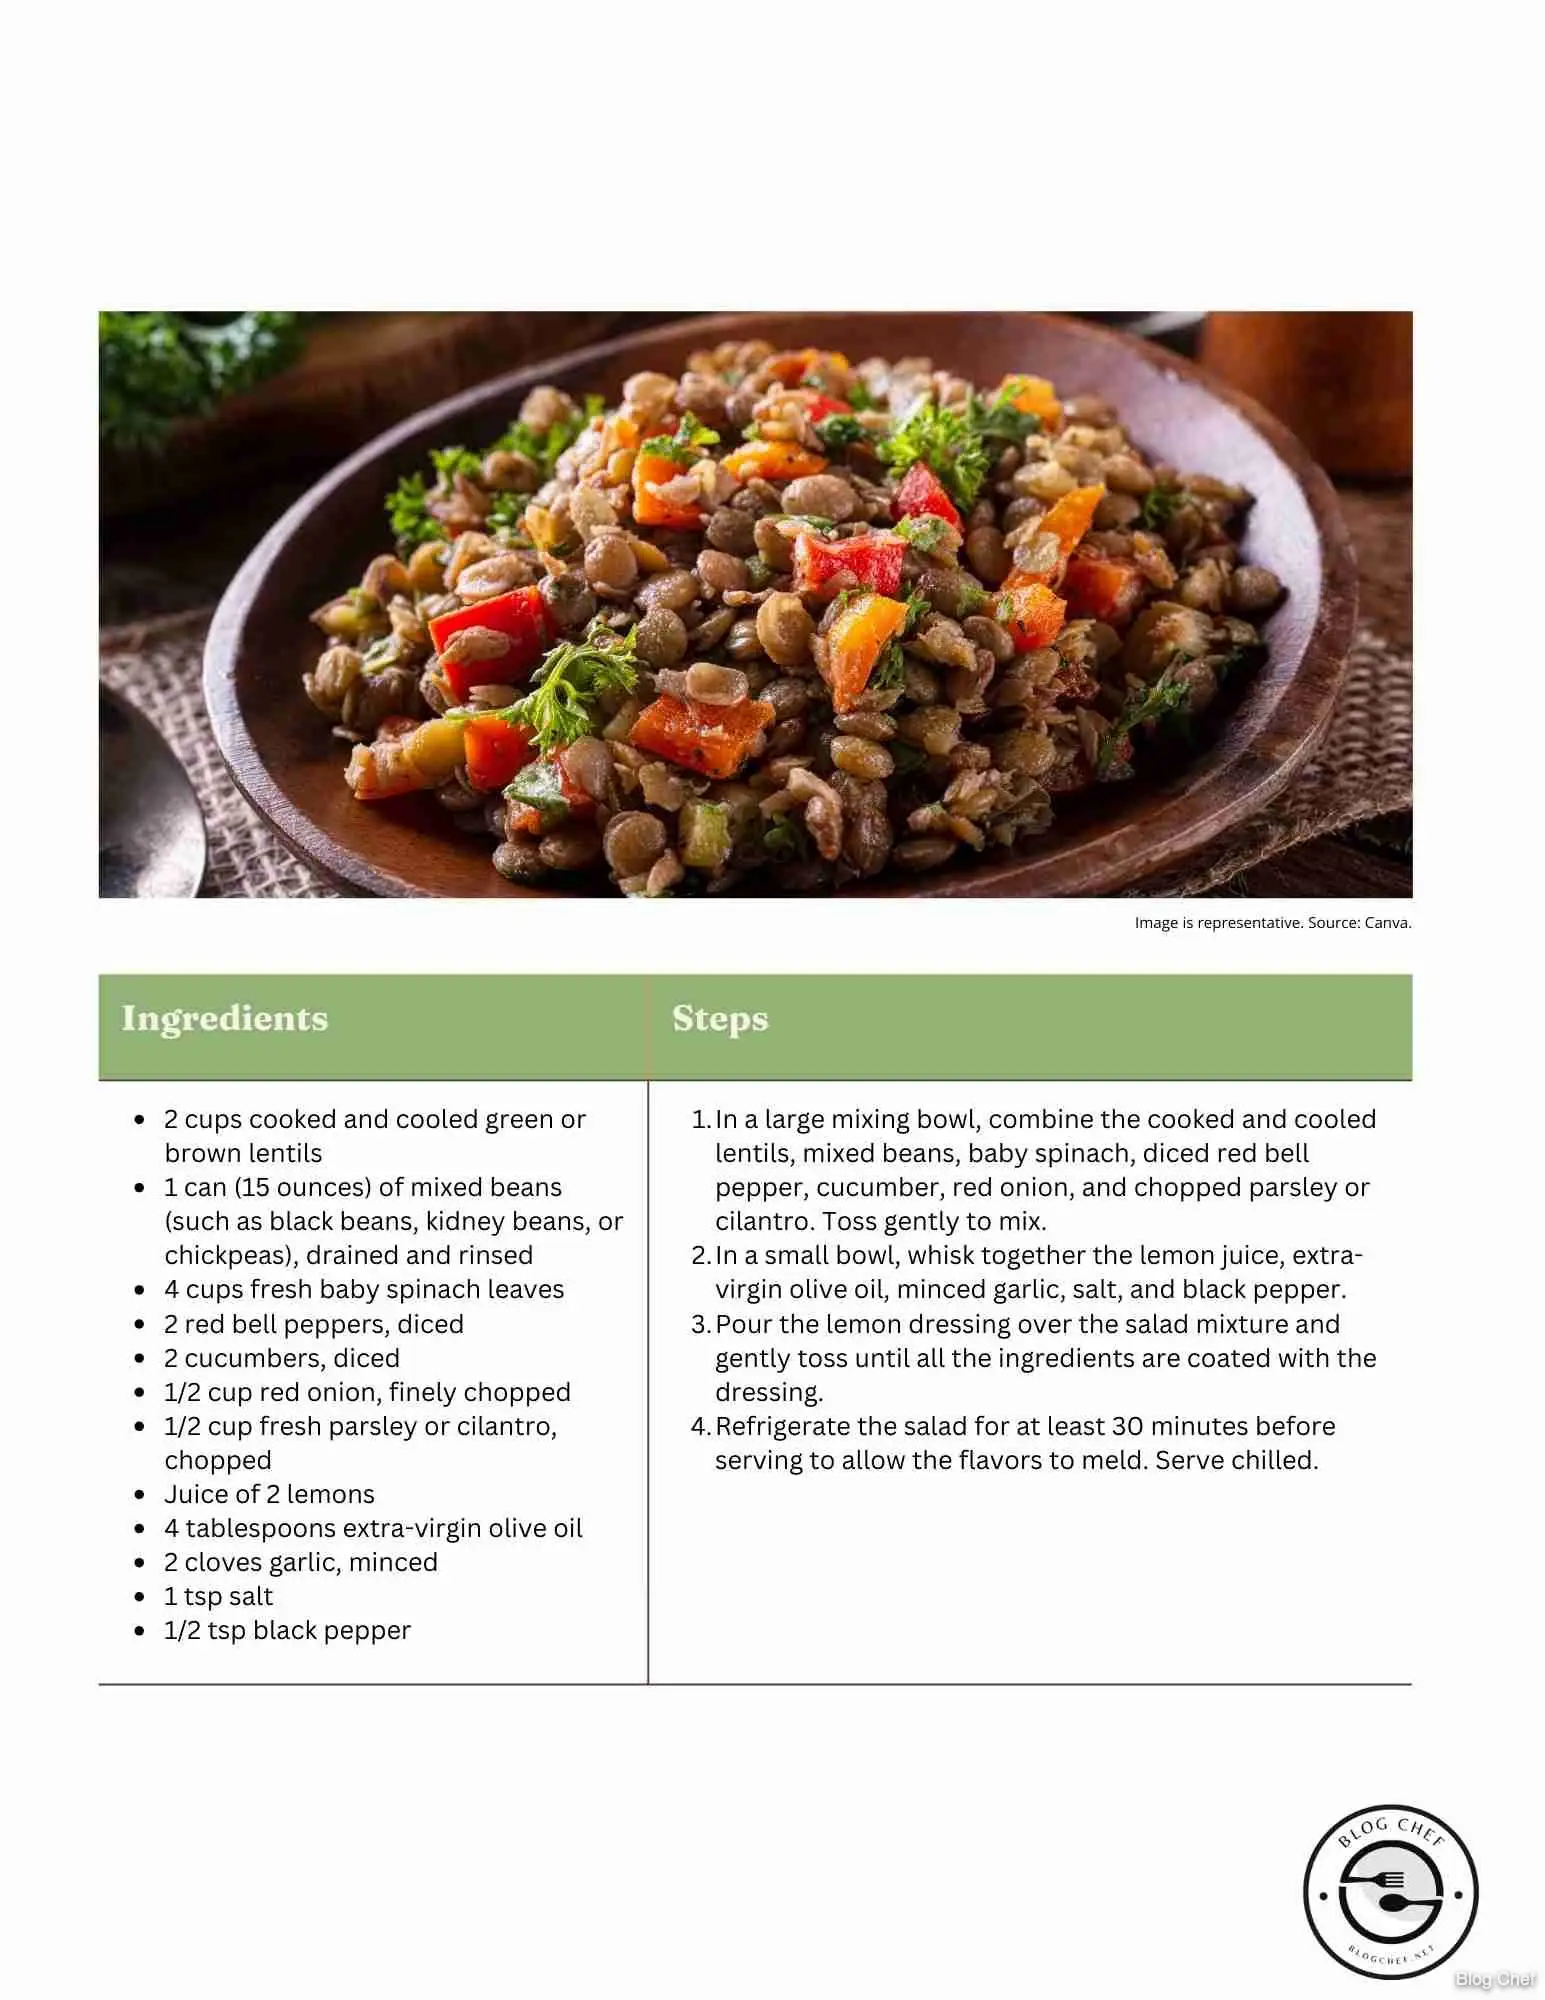 Recipe card for lentil and bean salad.